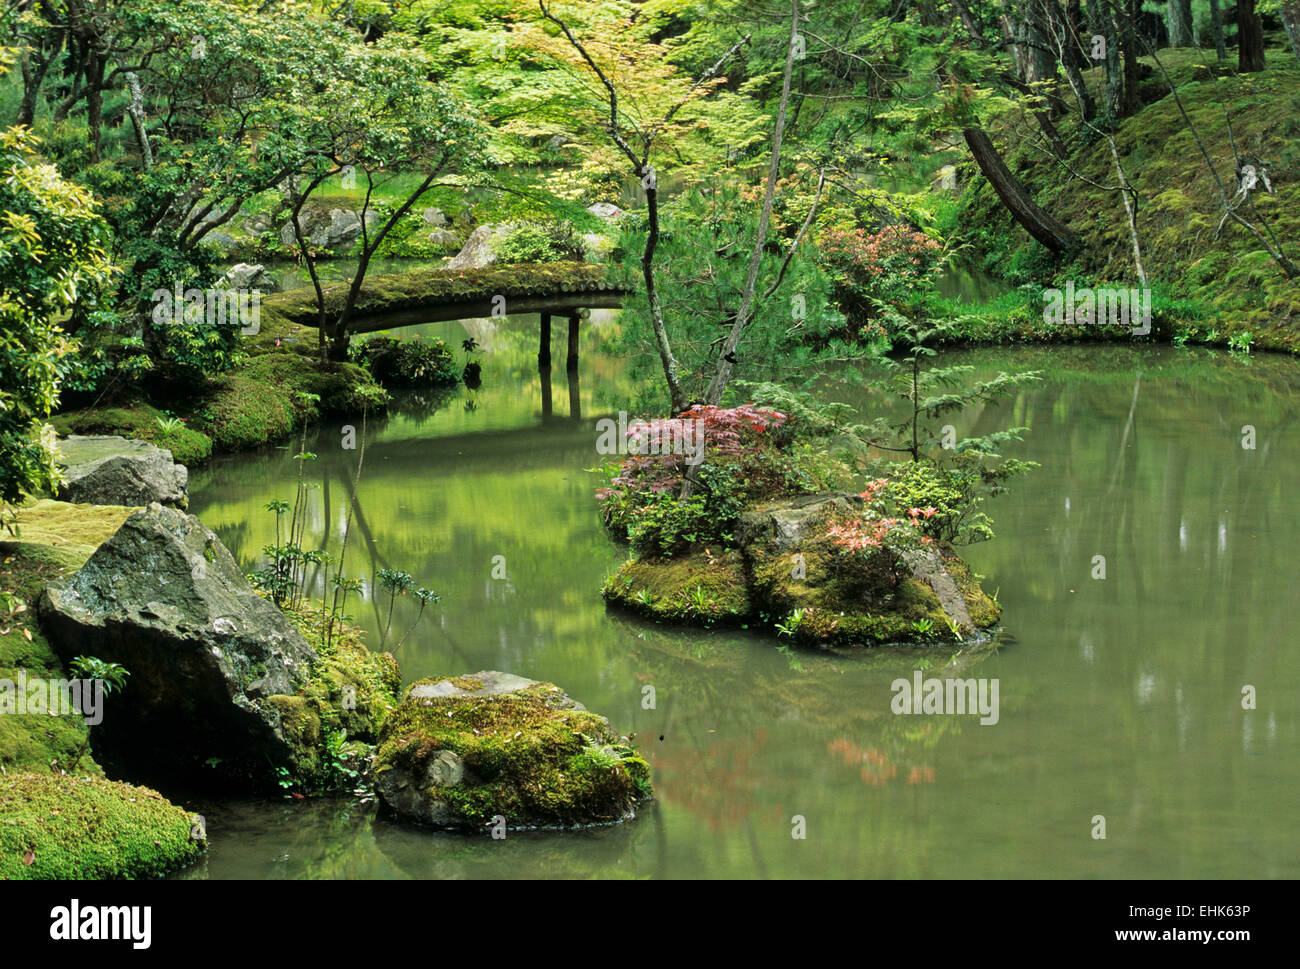 Saiho-ji, also known as Koka-dera, or the Moss Temple, is one of the  most venerable gardens in the Arashyama district of Kyoto. Stock Photo